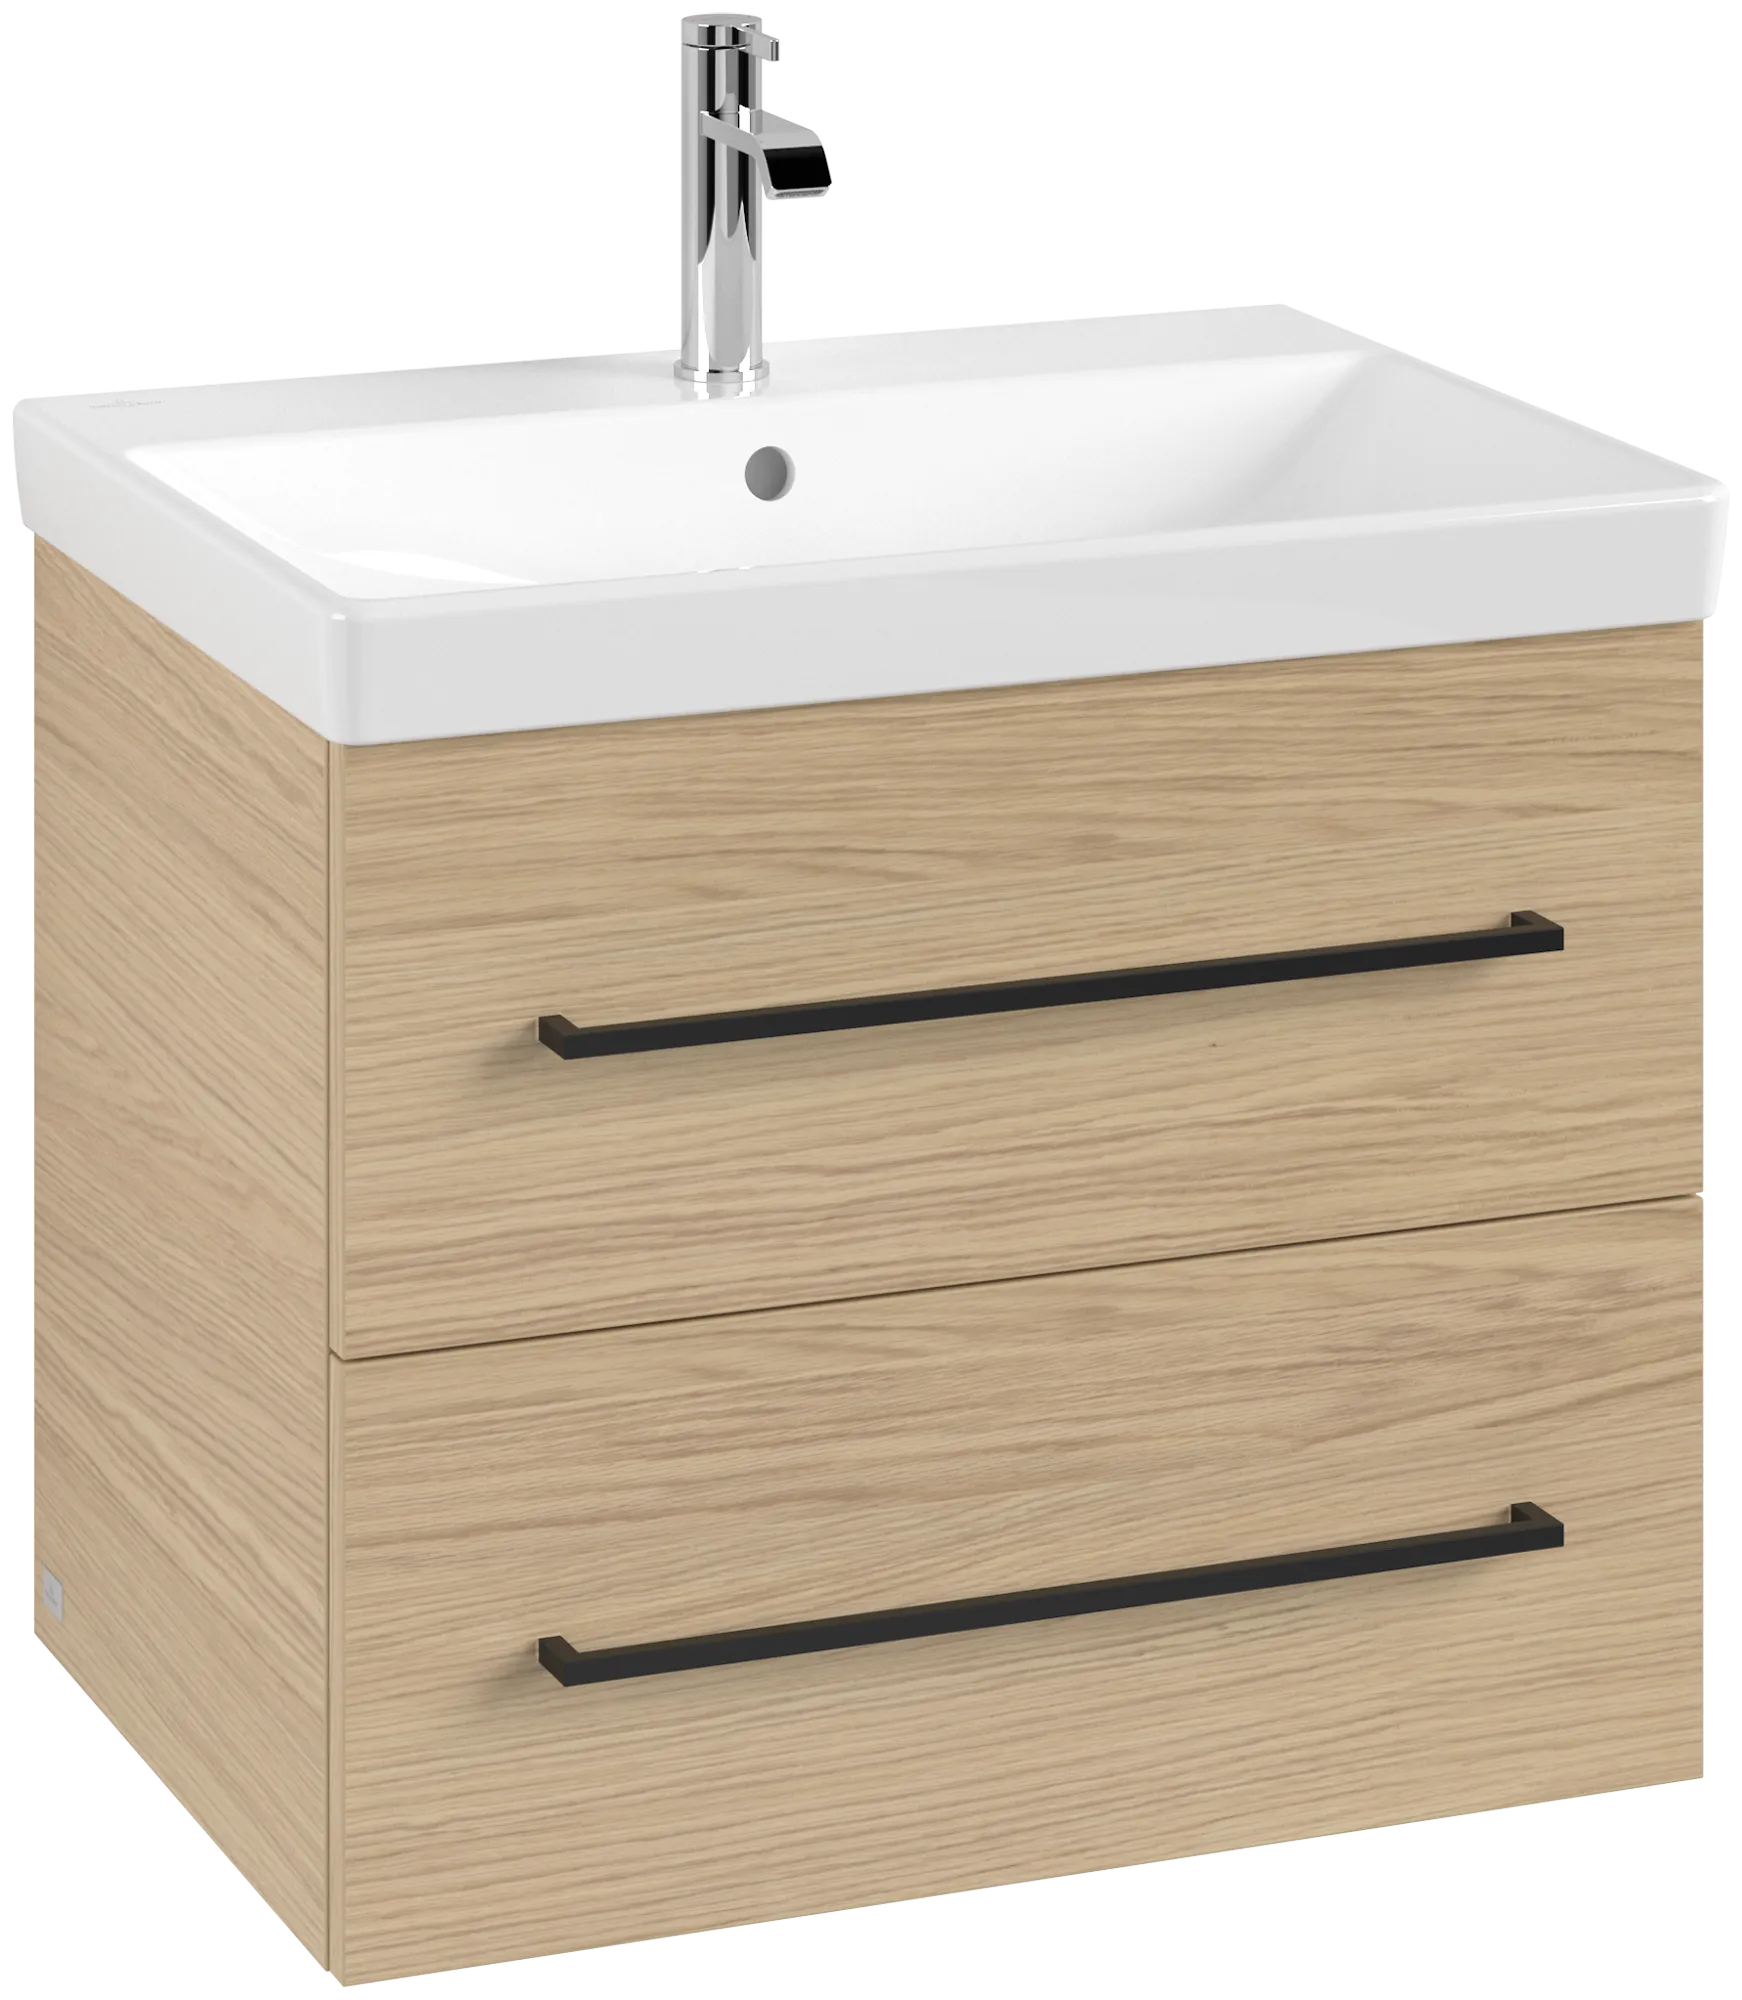 Picture of VILLEROY BOCH Avento Vanity unit, 2 pull-out compartments, 626 x 514 x 484 mm, Nordic Oak #A89010VJ